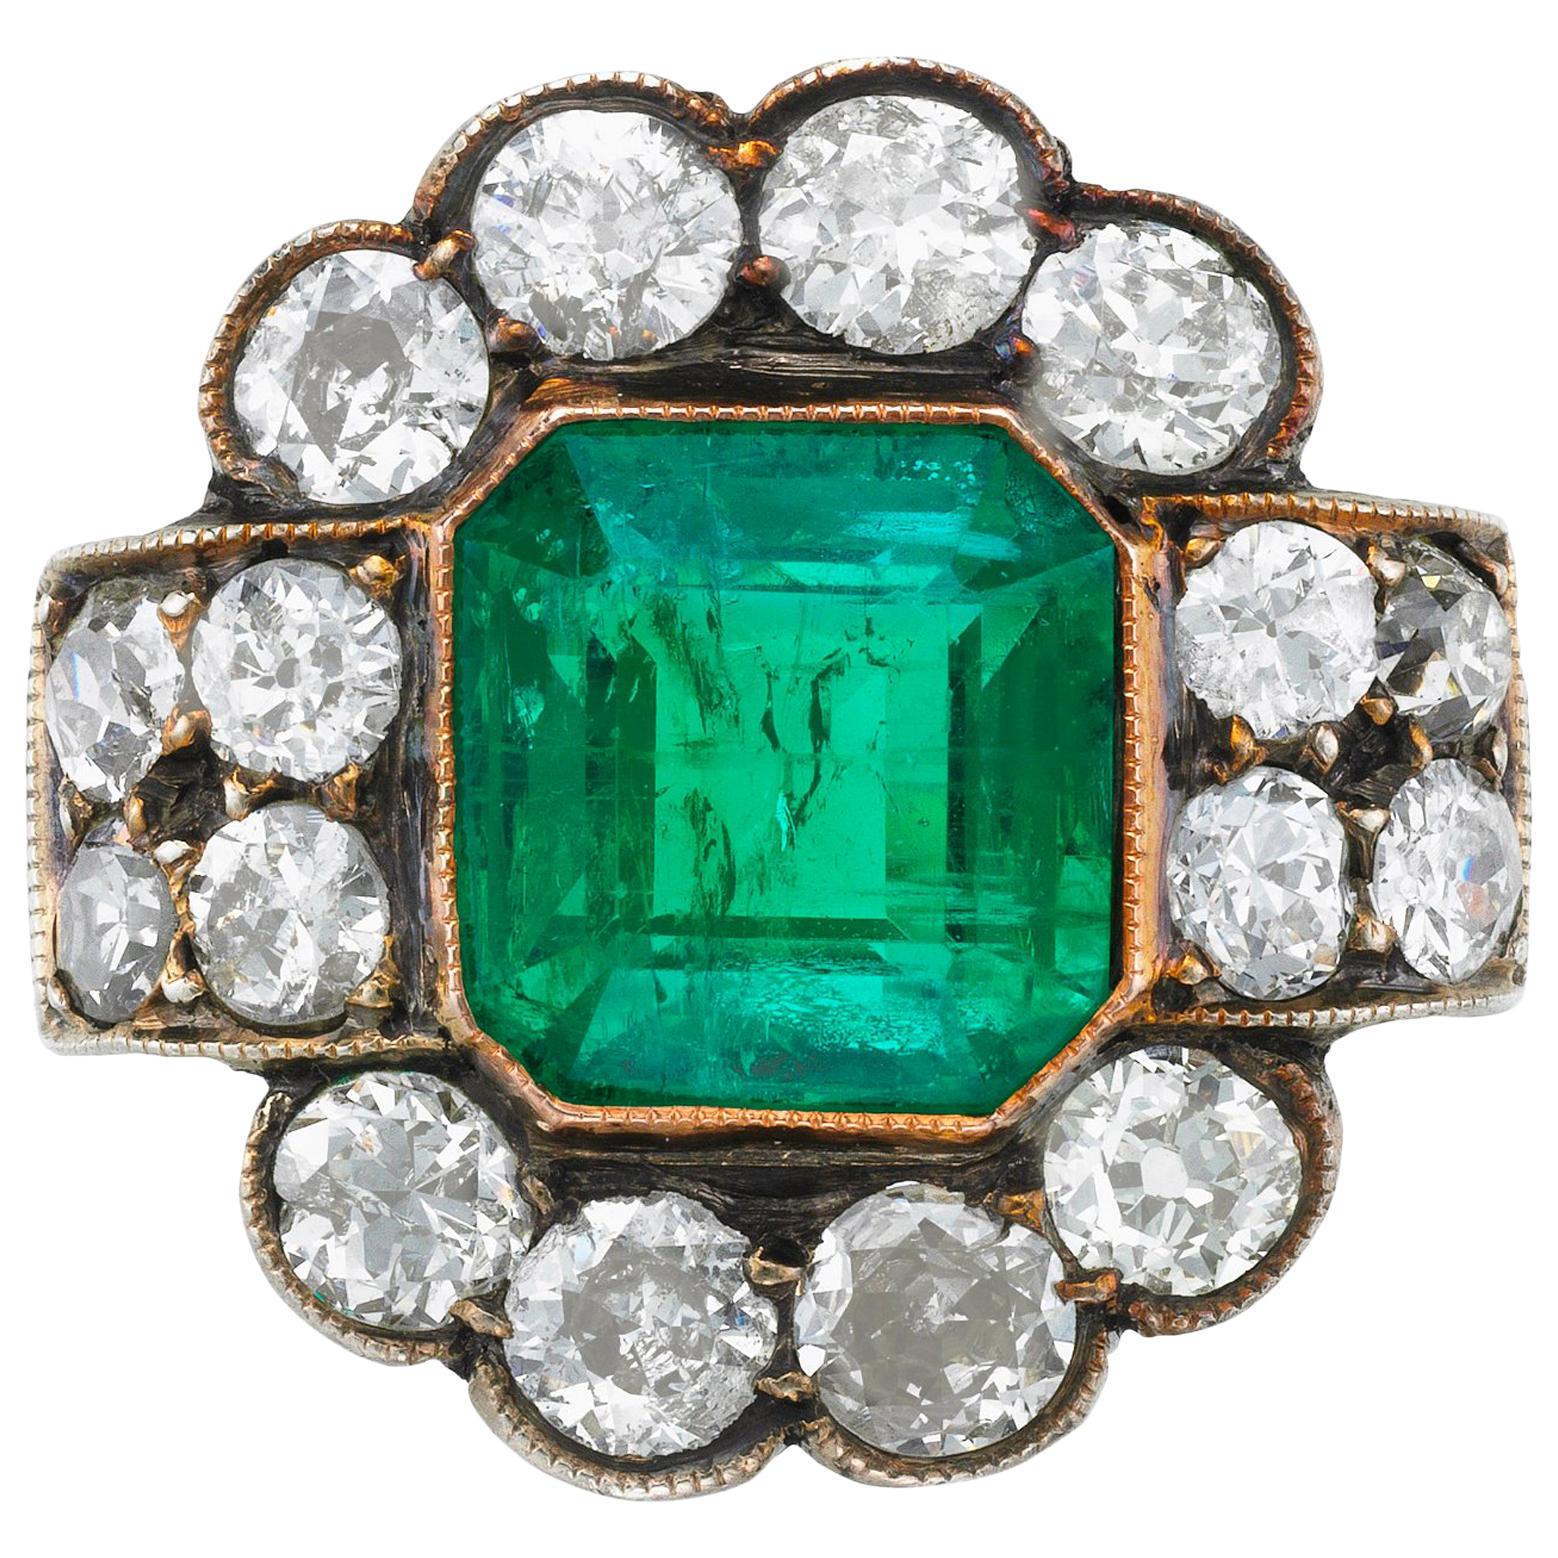 Emerald and Diamond Ring with an AGL Report
Natural Emerald origin from Russia 